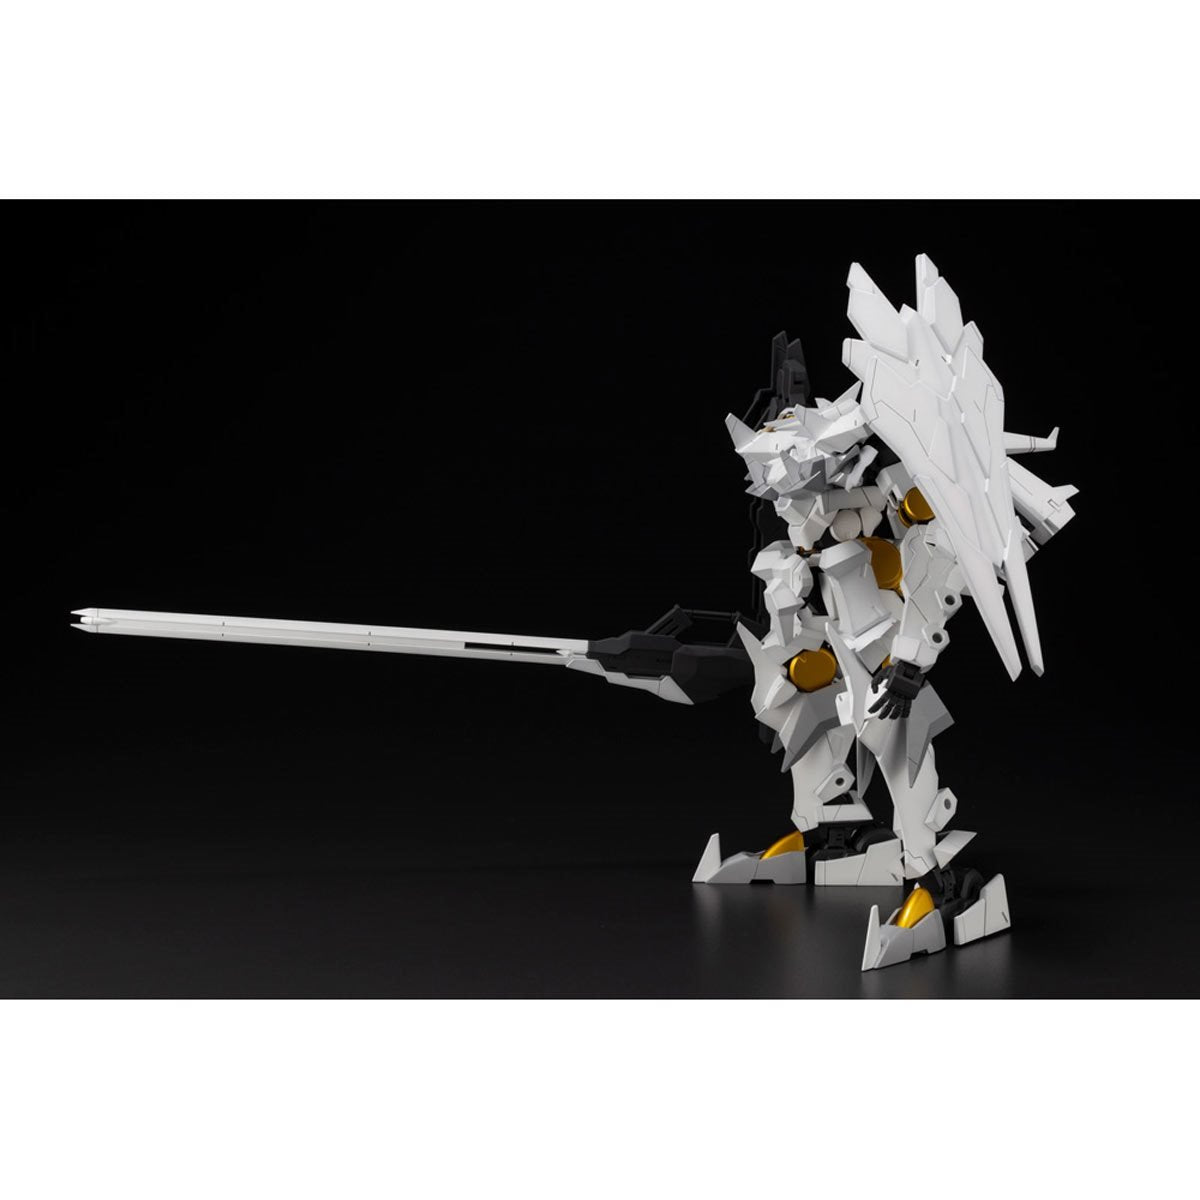 Frame Arms Type-Hector Durandal 1:100 Scale Model Kit